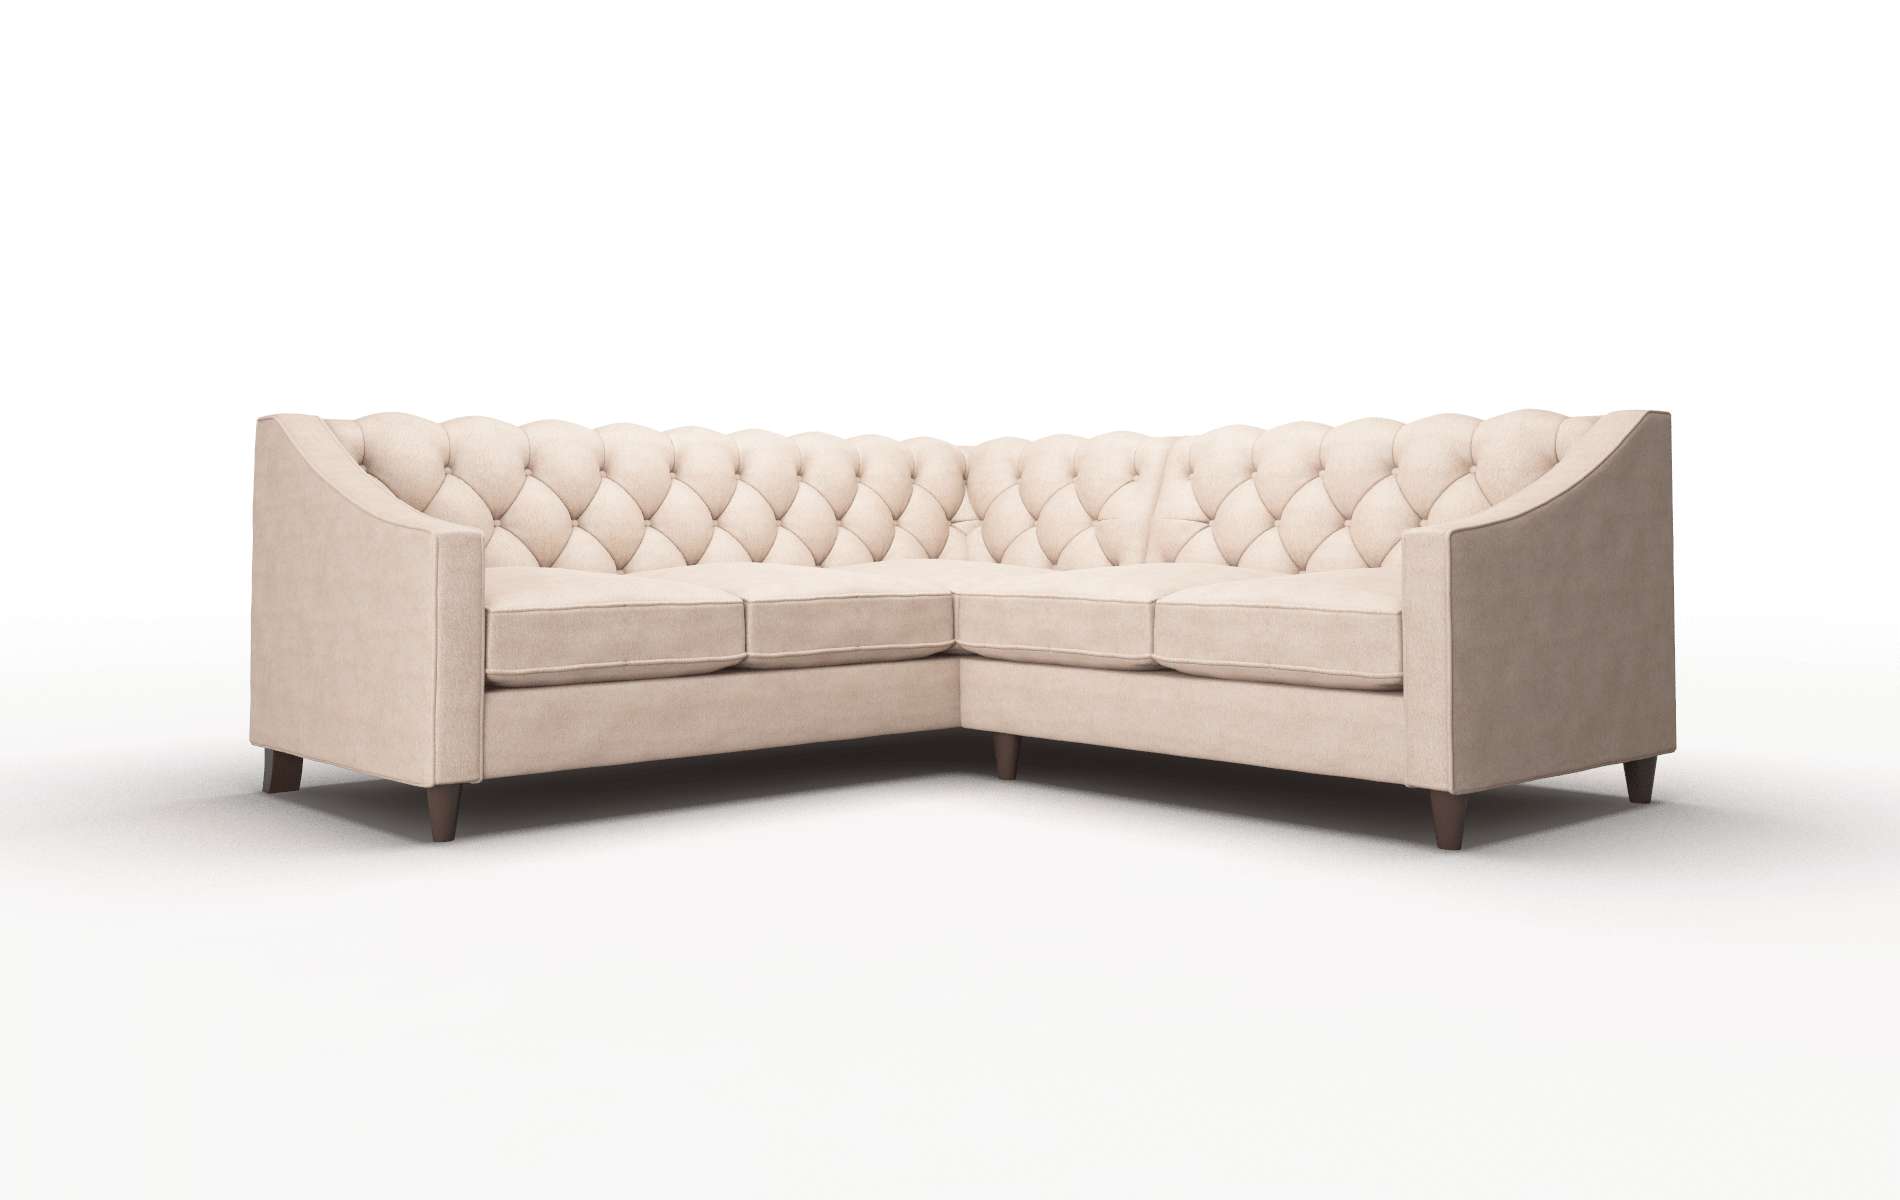 Manchester Bella Pewter Sectional espresso legs 1